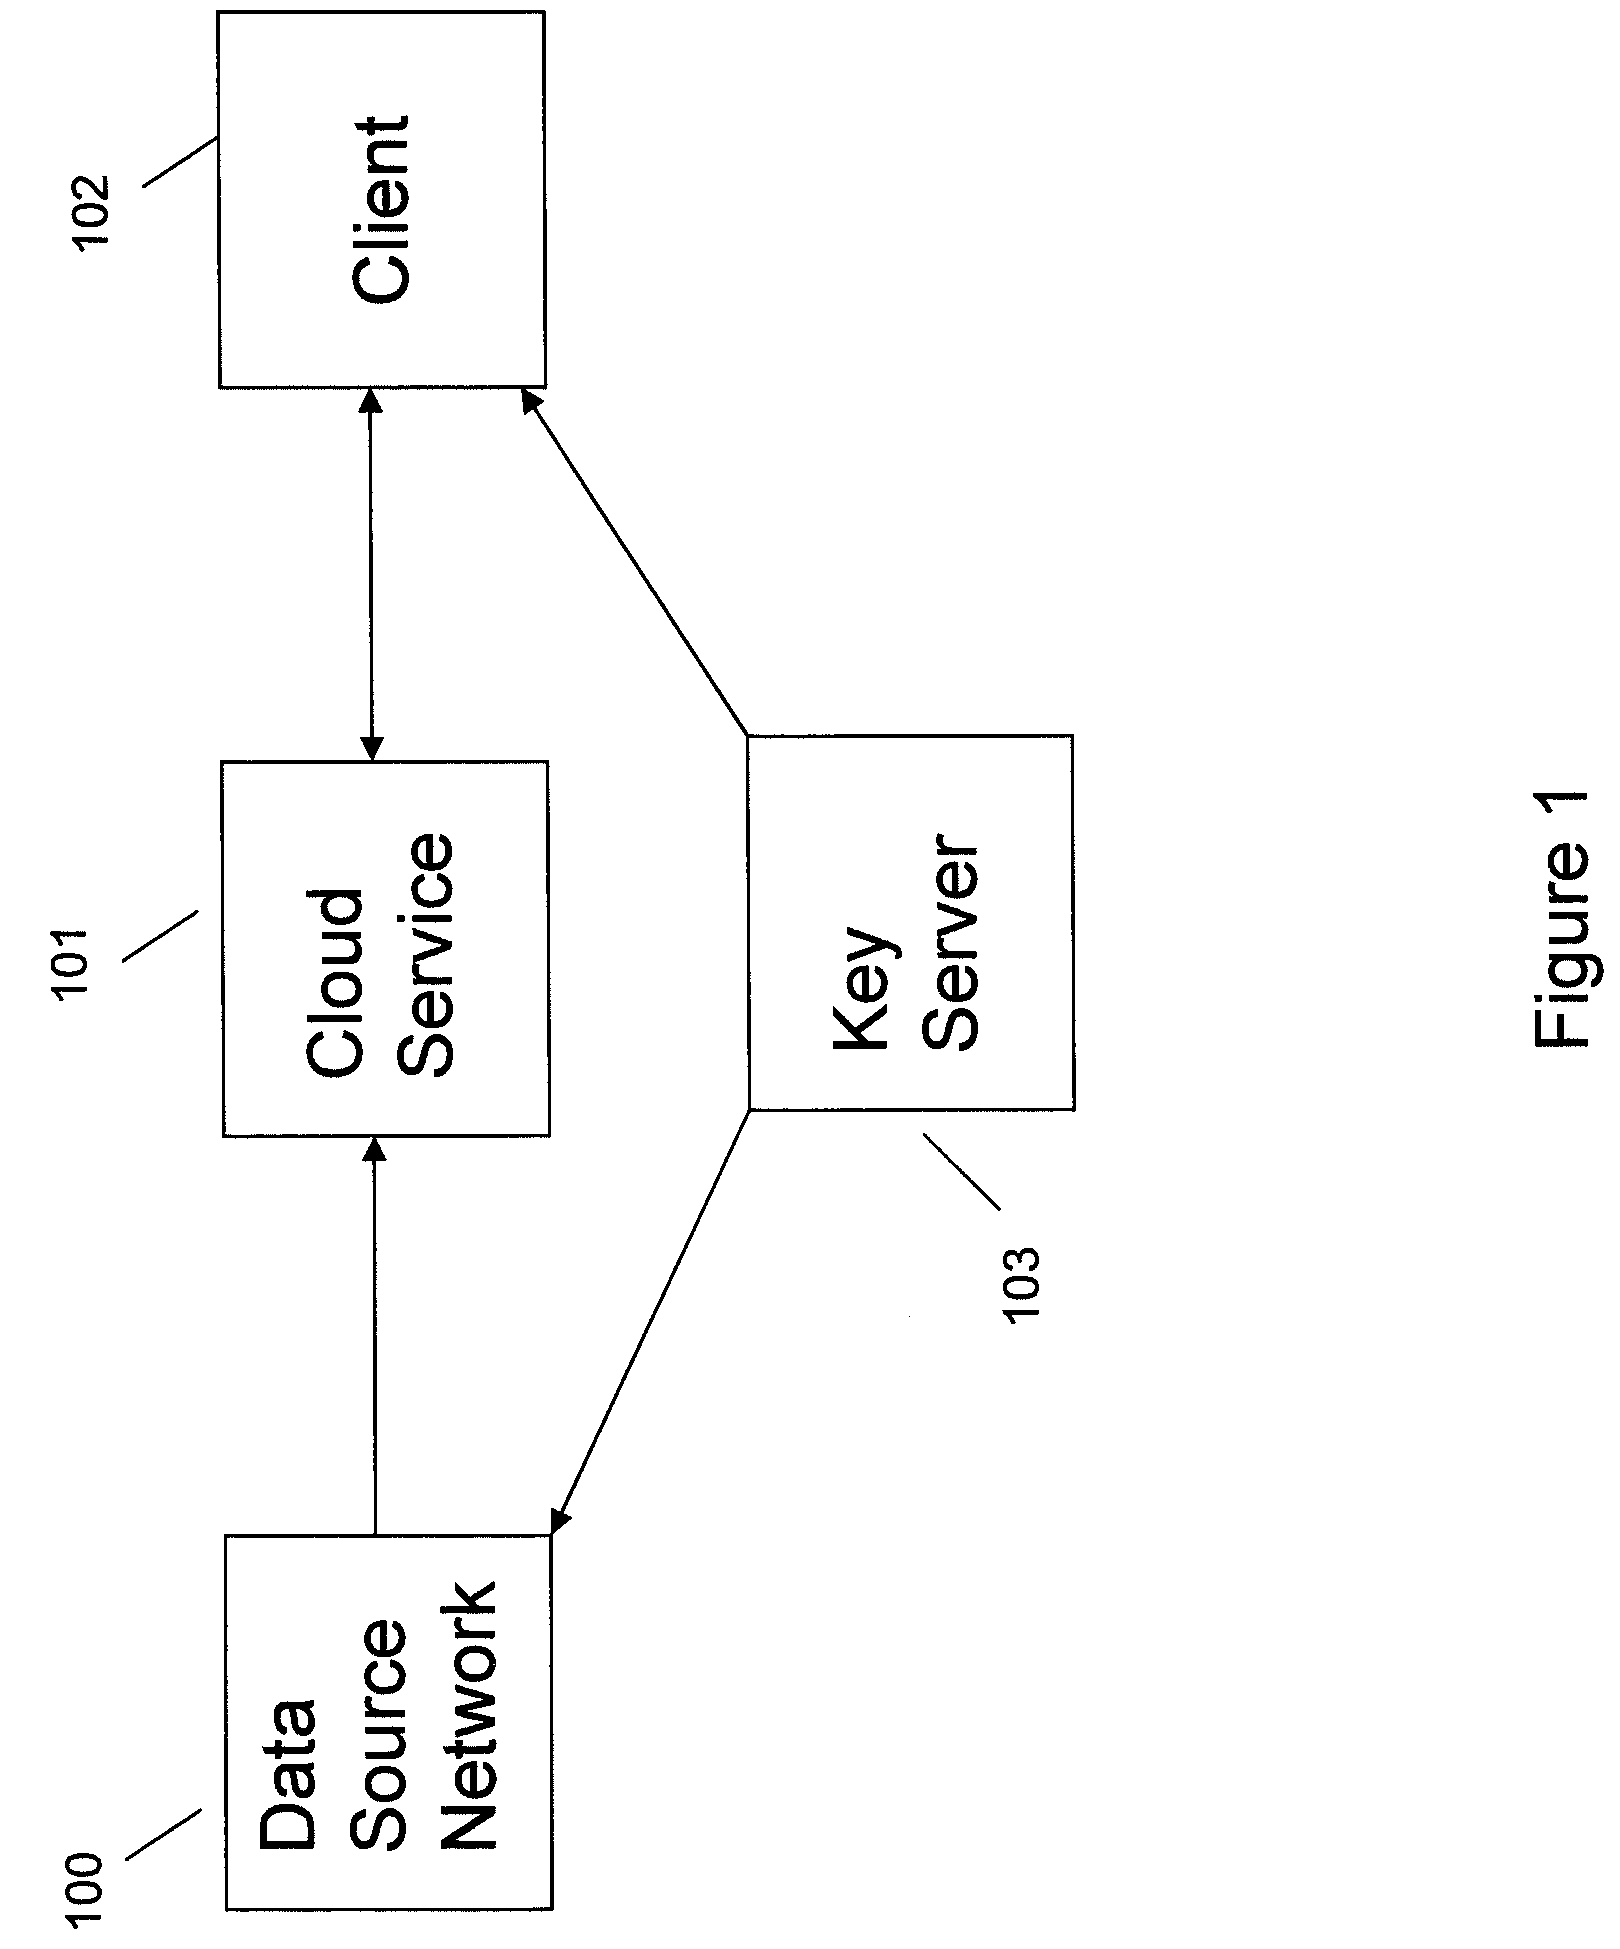 Systems and methods for communication, storage, retrieval, and computation of simple statistics and logical operations on encrypted data